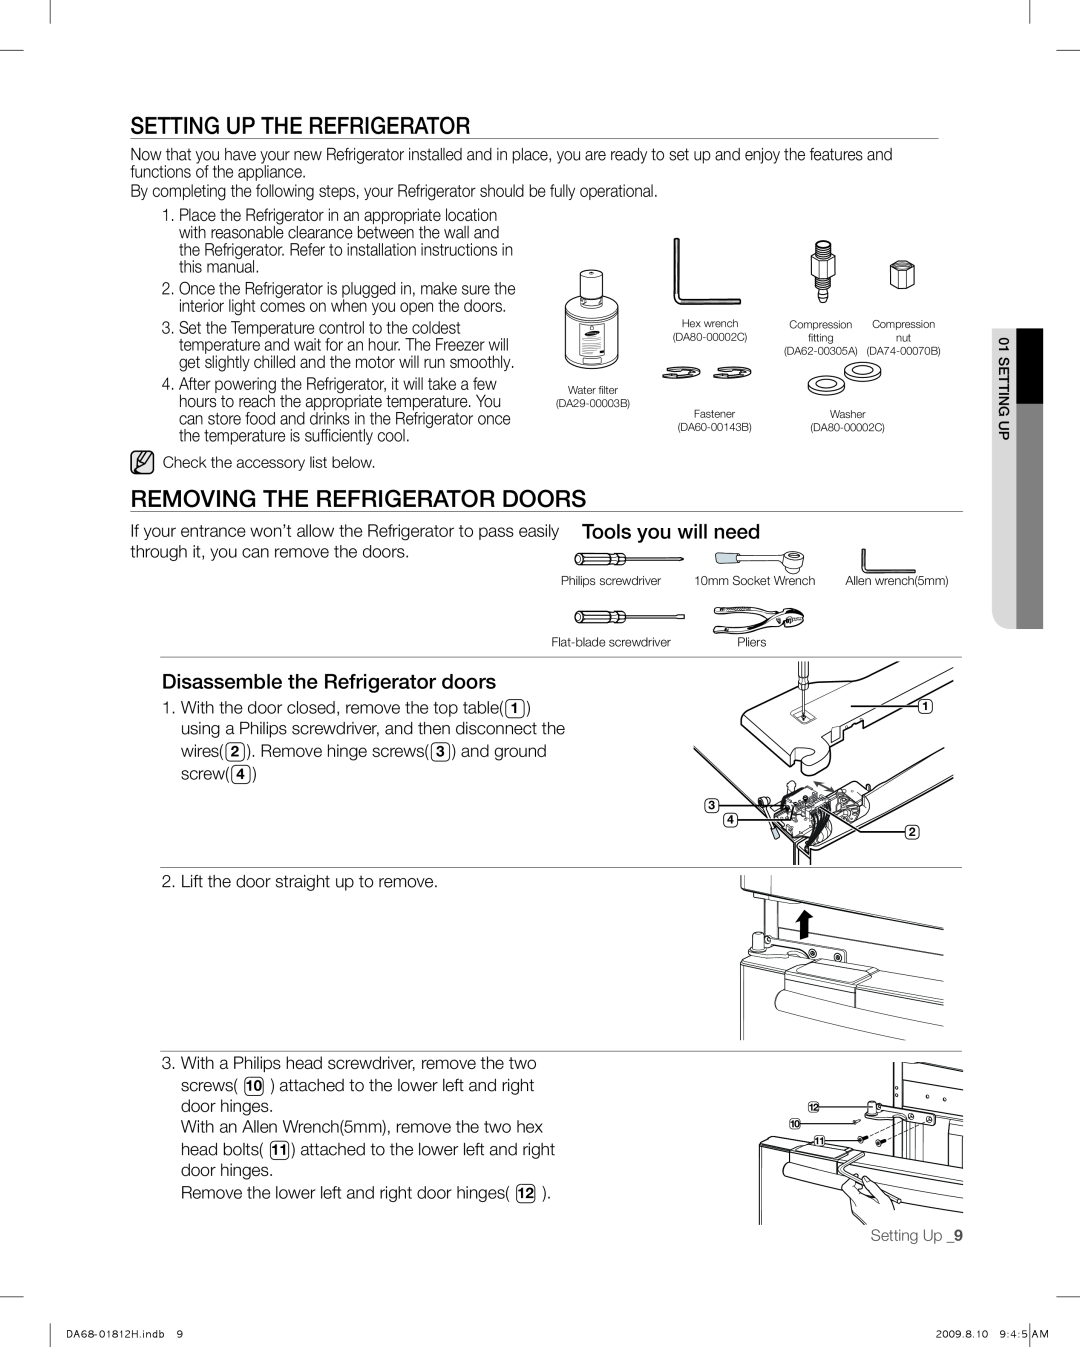 Samsung RF263 user manual Setting Up The Refrigerator, Removing the refrigerator doors, Disassemble the Refrigerator doors 